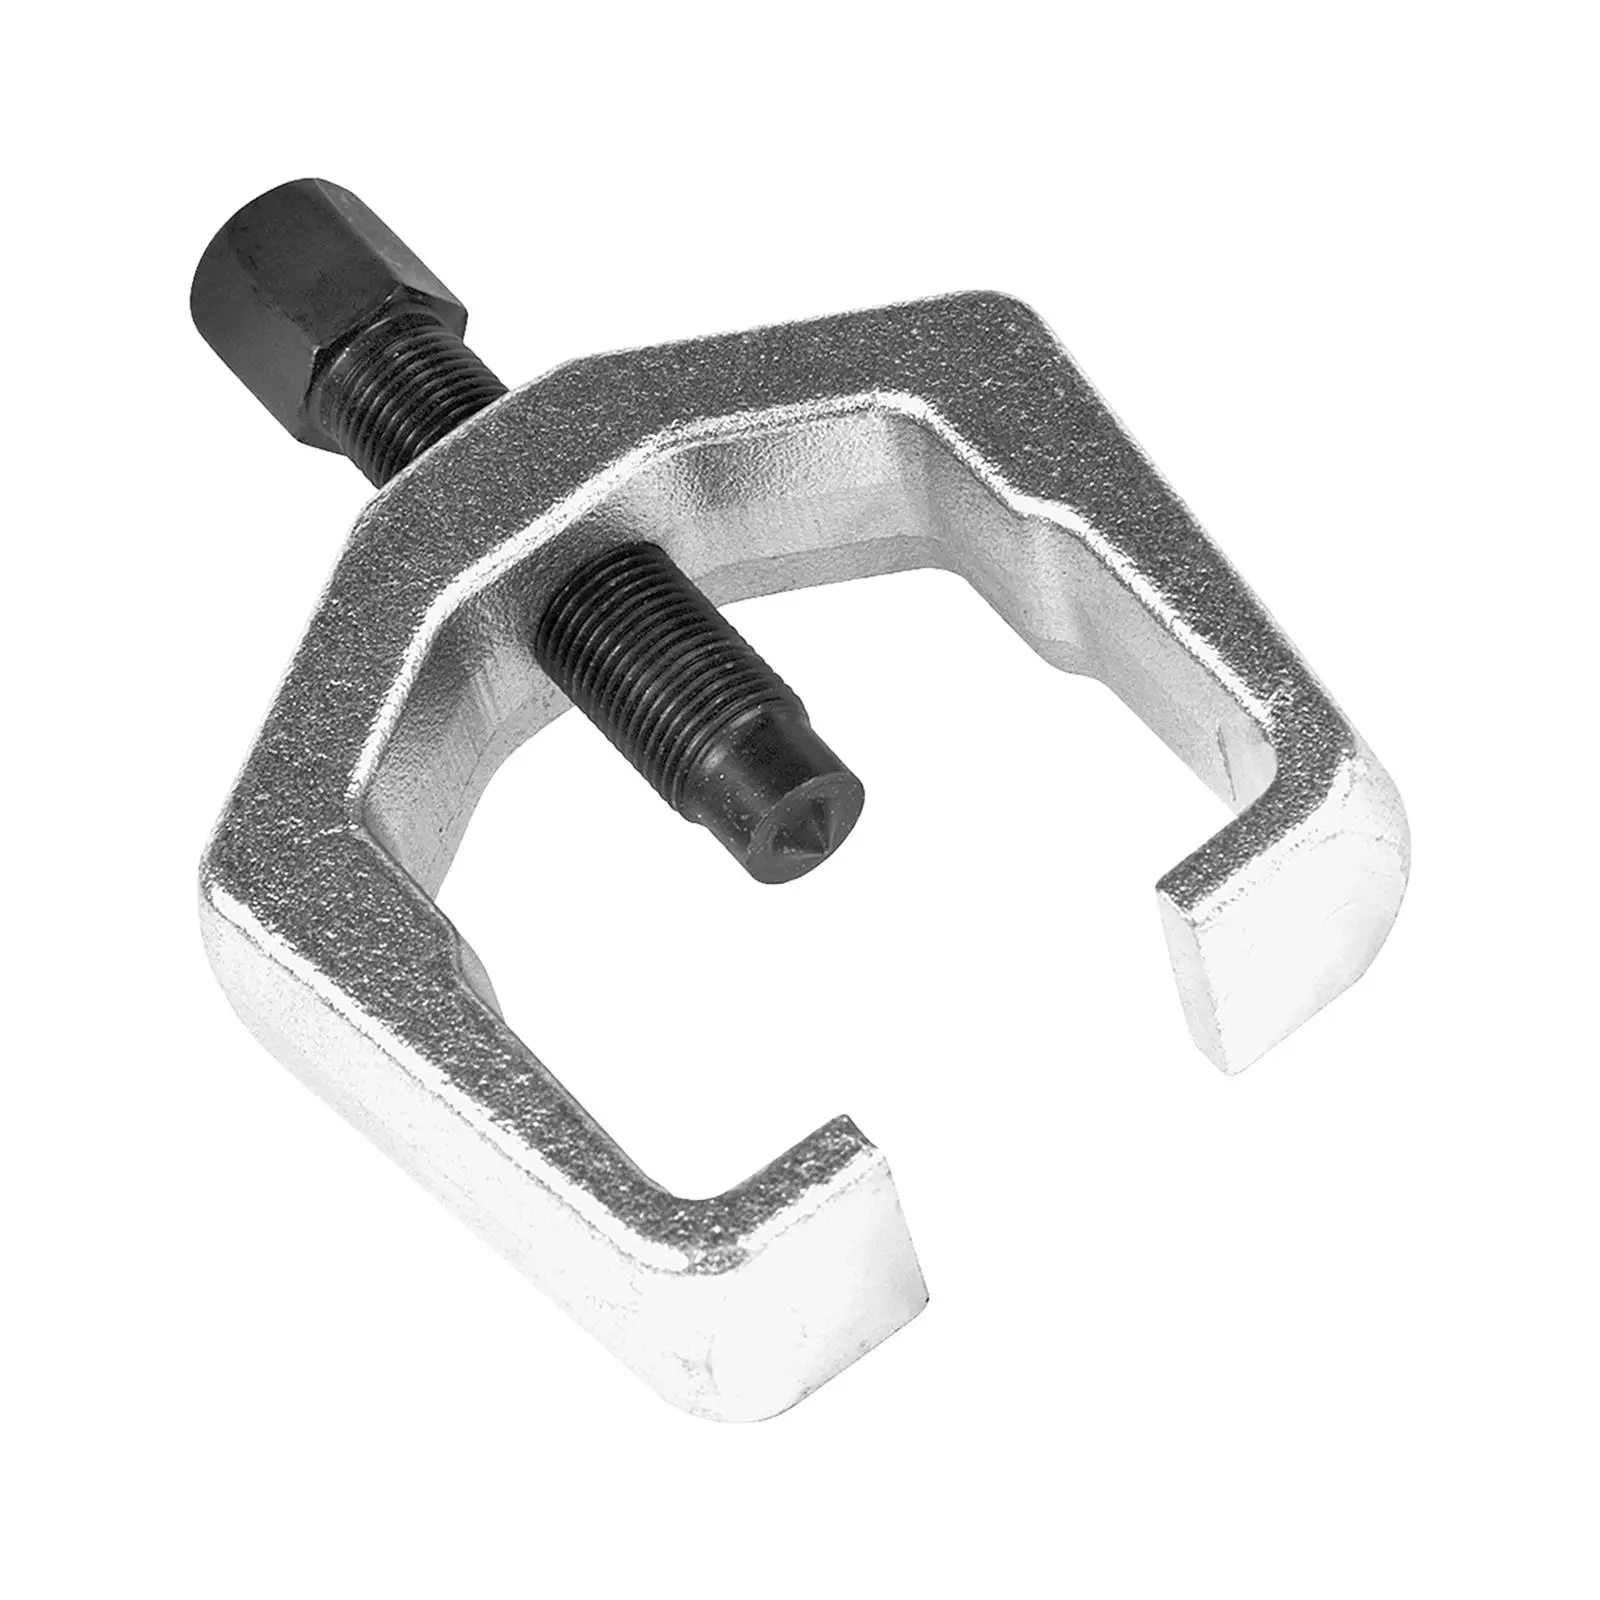 Slack Adjuster Puller Trailers 2 Jaw Gear Puller Durable Heavy Duty Compact Removal Tool for Gears Remover Tool Maintenance Tool